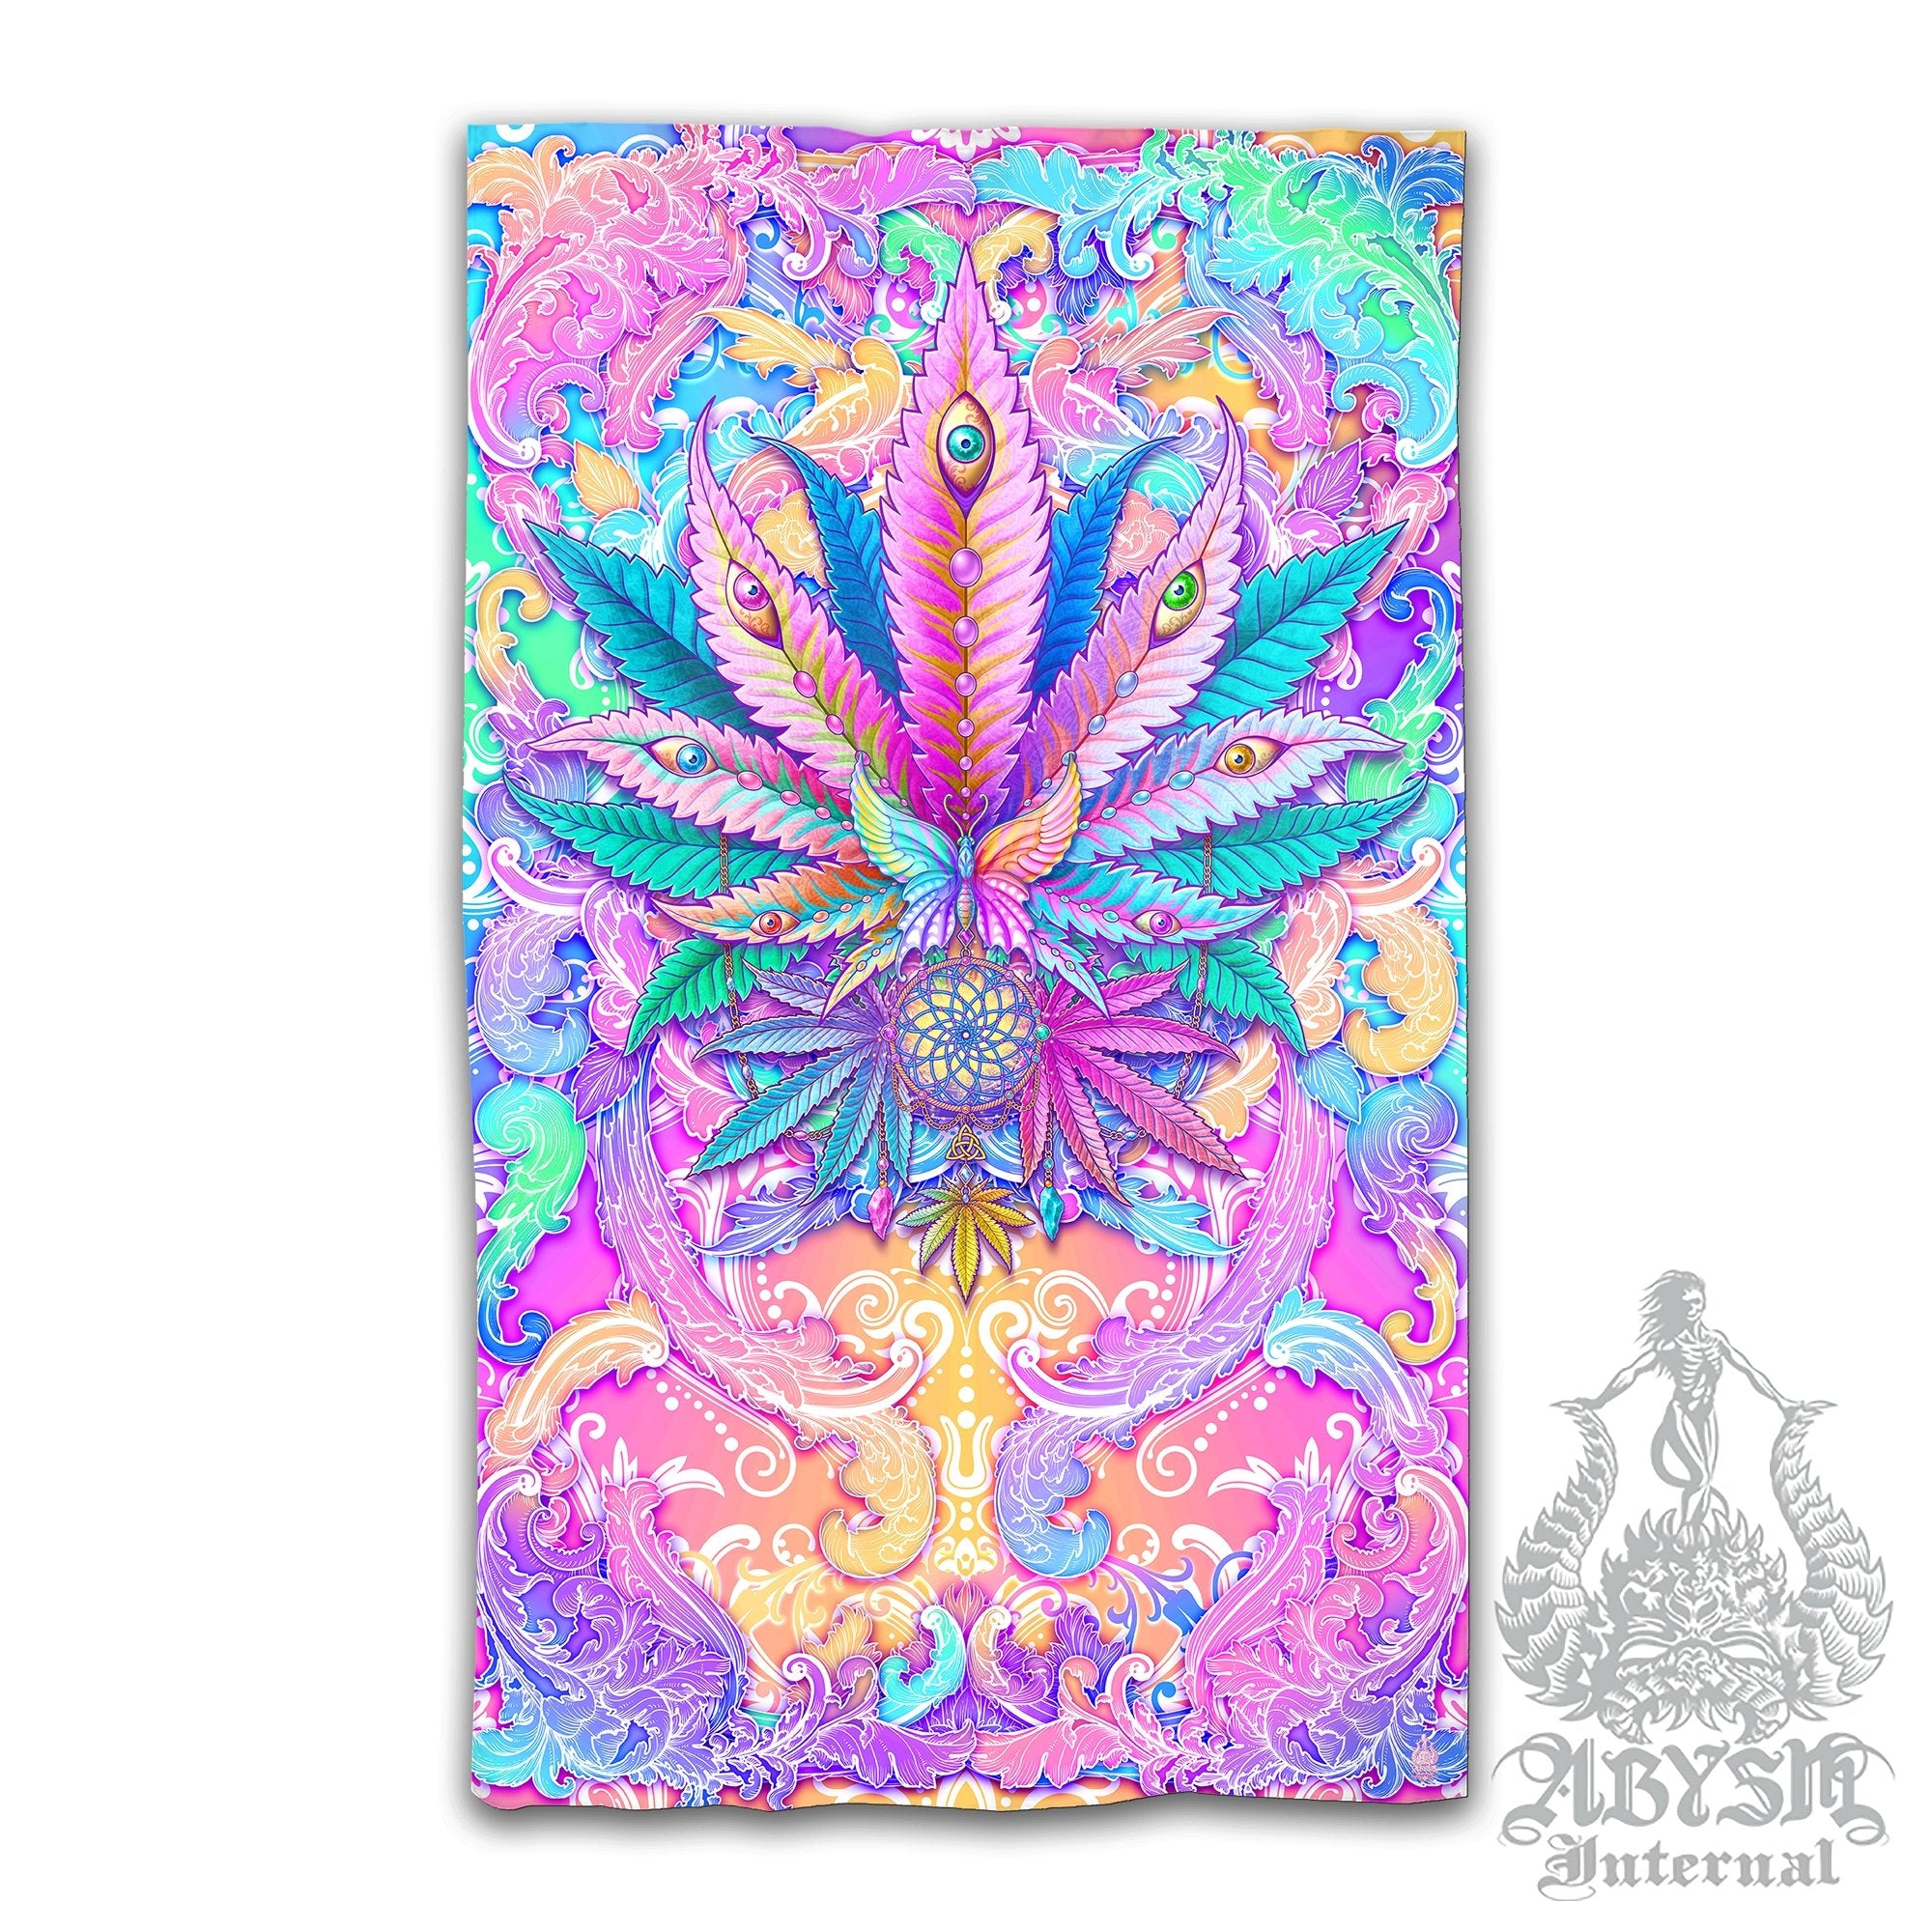 Weed Blackout Curtains, Cannabis Home and Shop Decor, Long Window Panels, Pastel and Aesthetic Print, Girly 420 Room Art - Abysm Internal